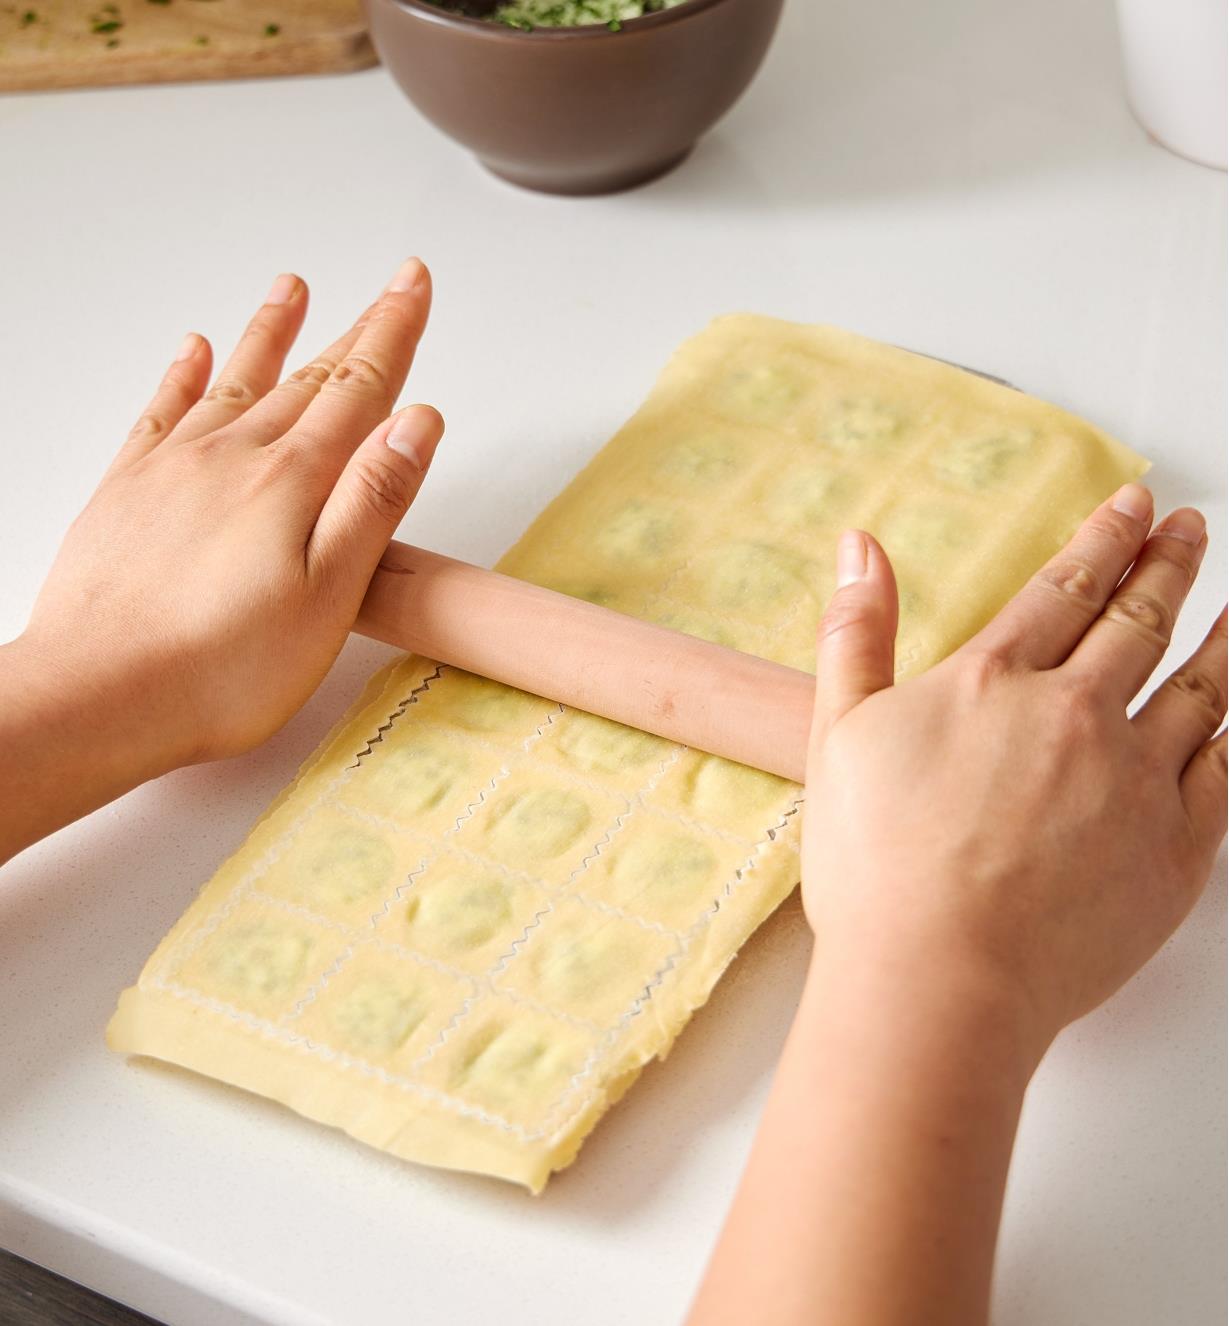 Passing the roller over the pasta-covered ravioli mold to seal the layers